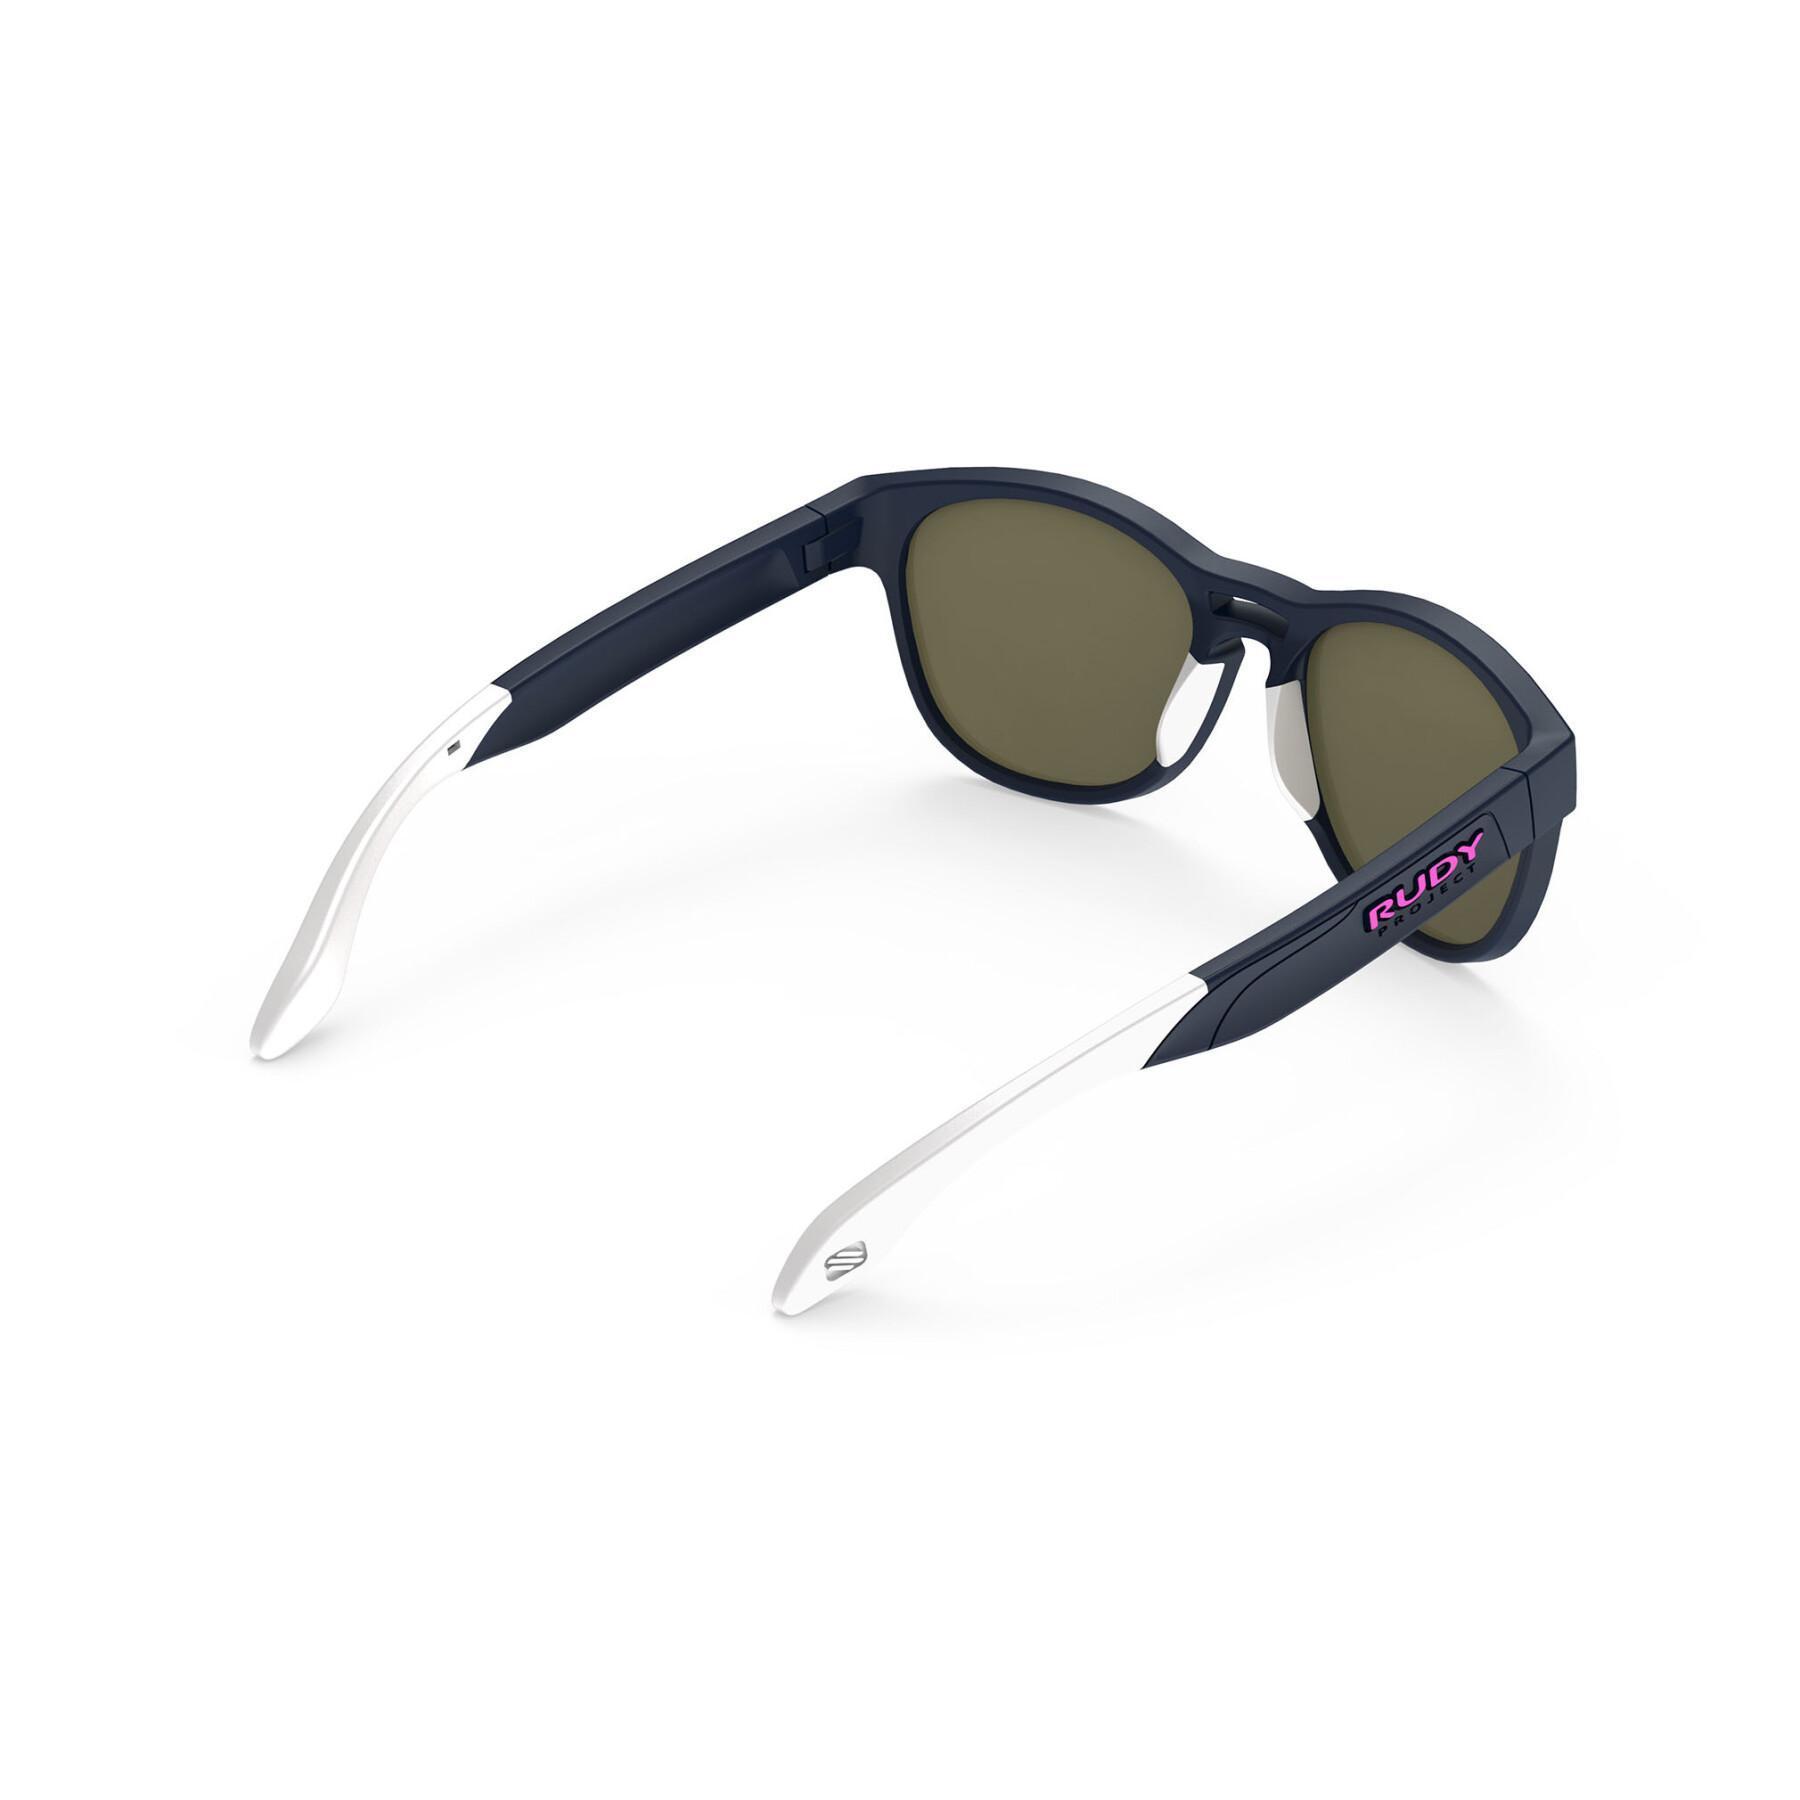 Sonnenbrille Rudy Project spinair 56